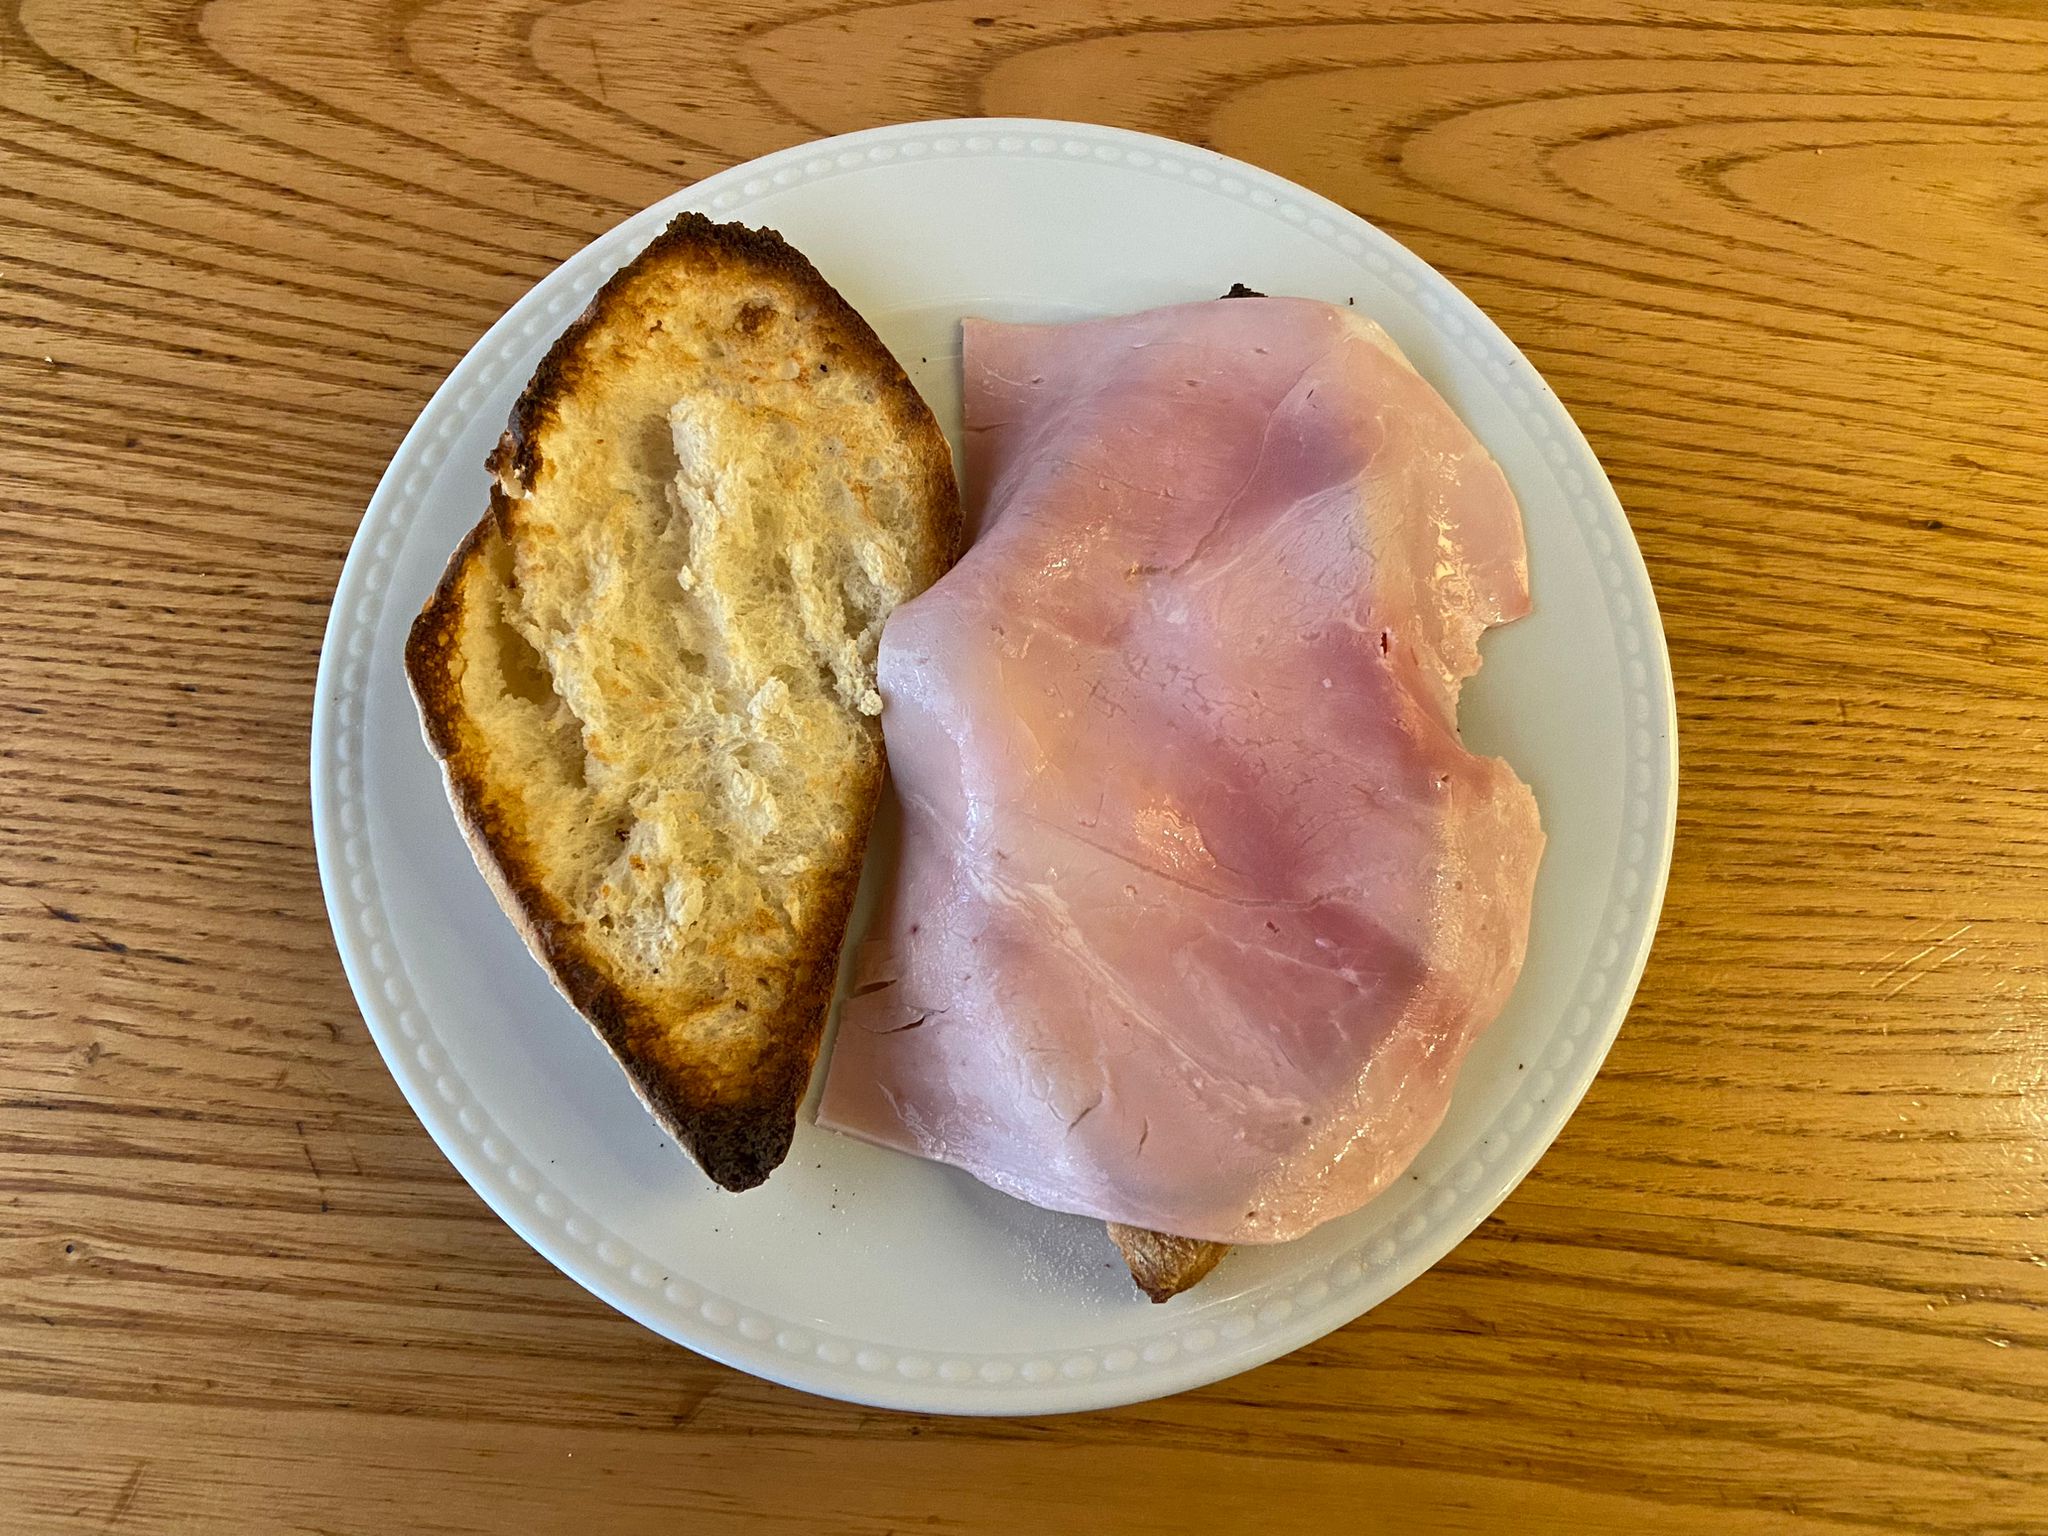 Toast with oil or butter and york ham